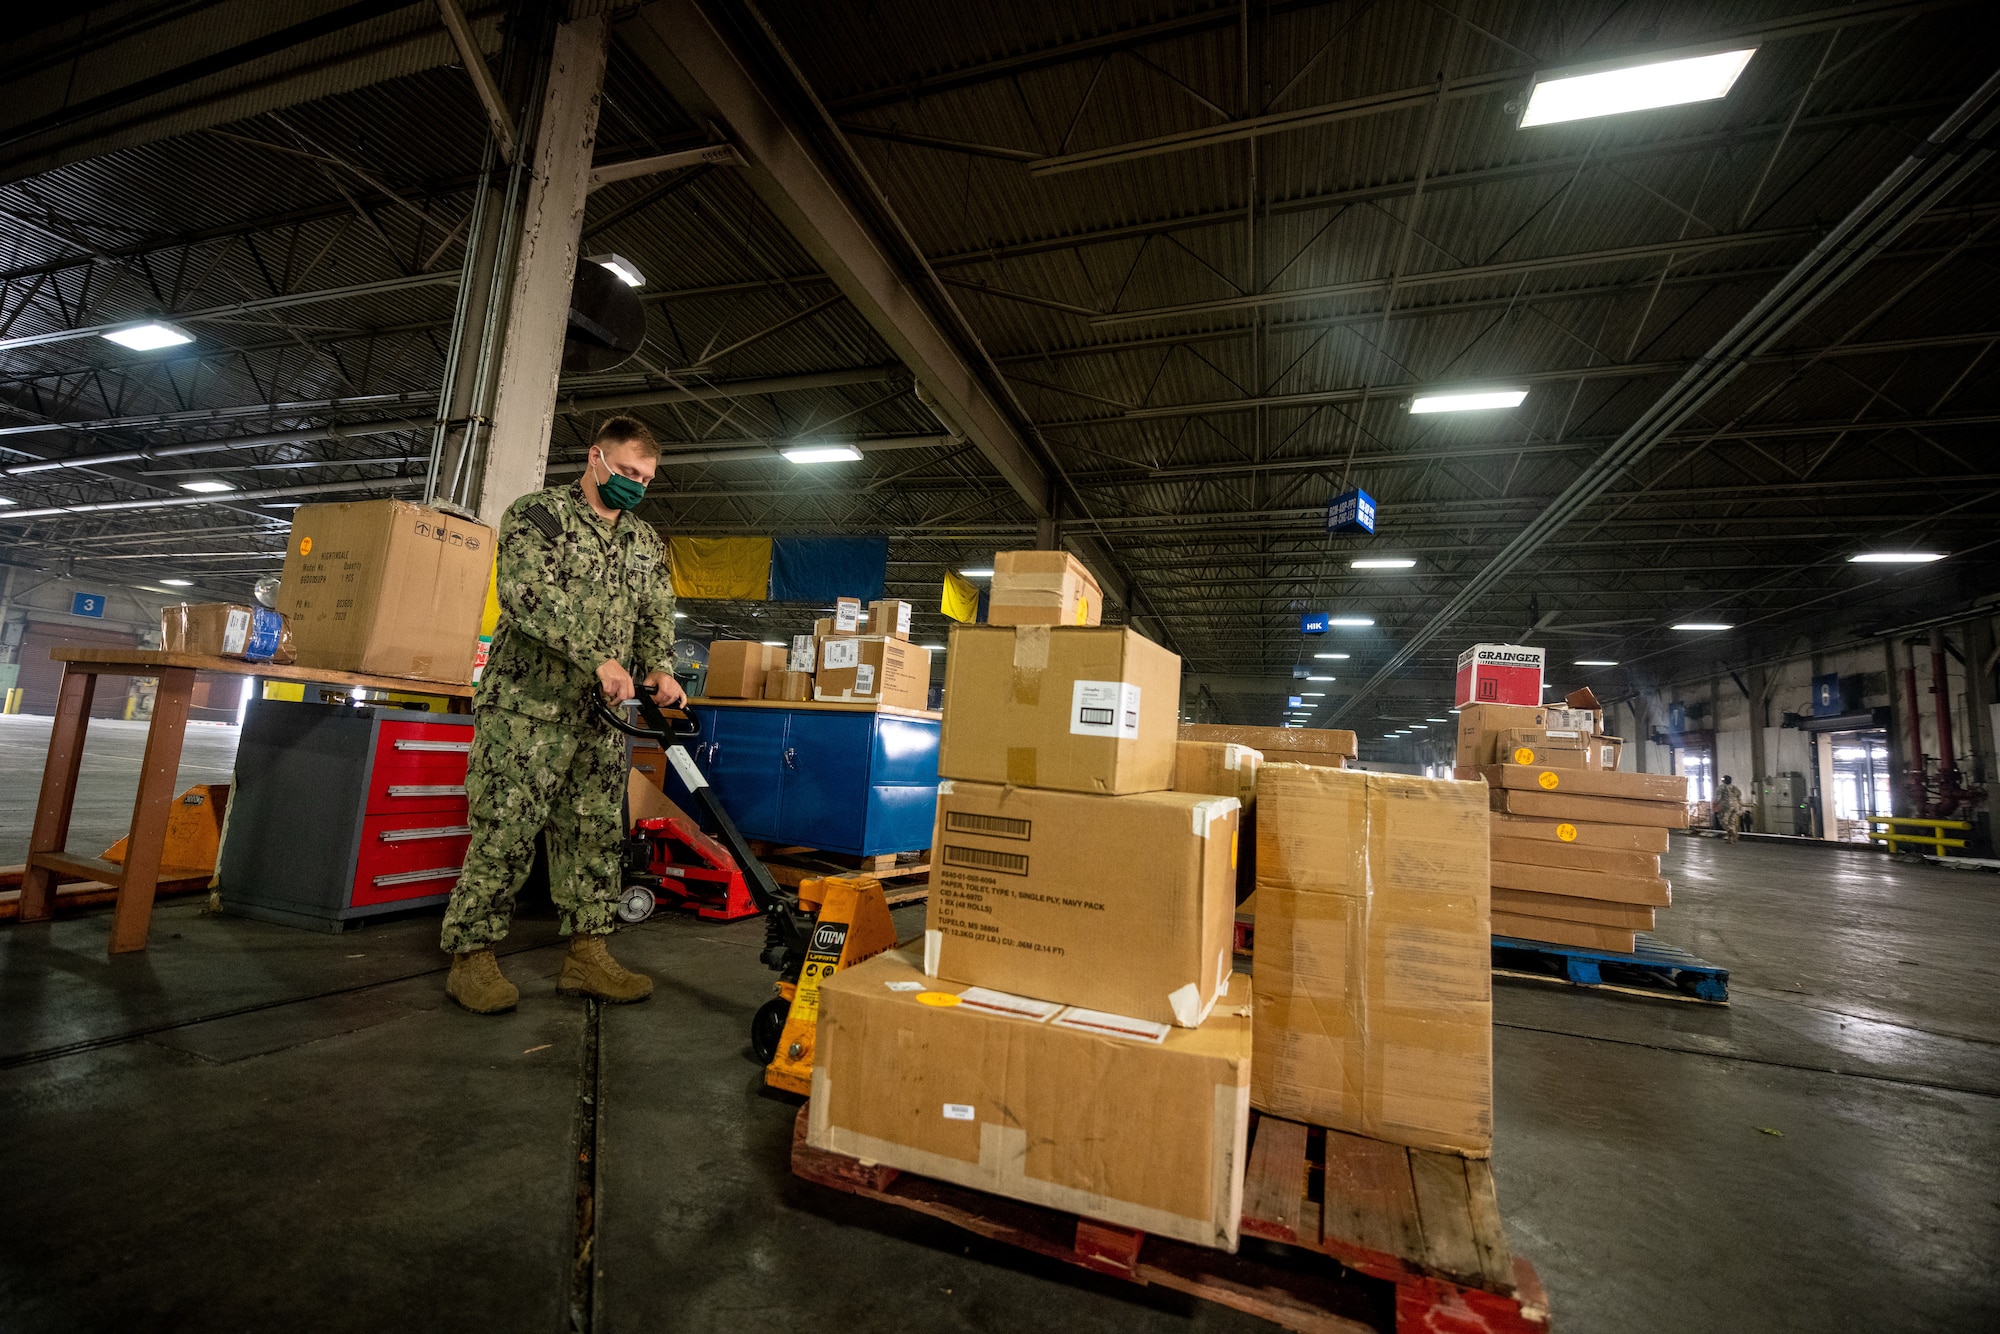 A Navy service member moves a small pallet of boxes inside a large warehouse.